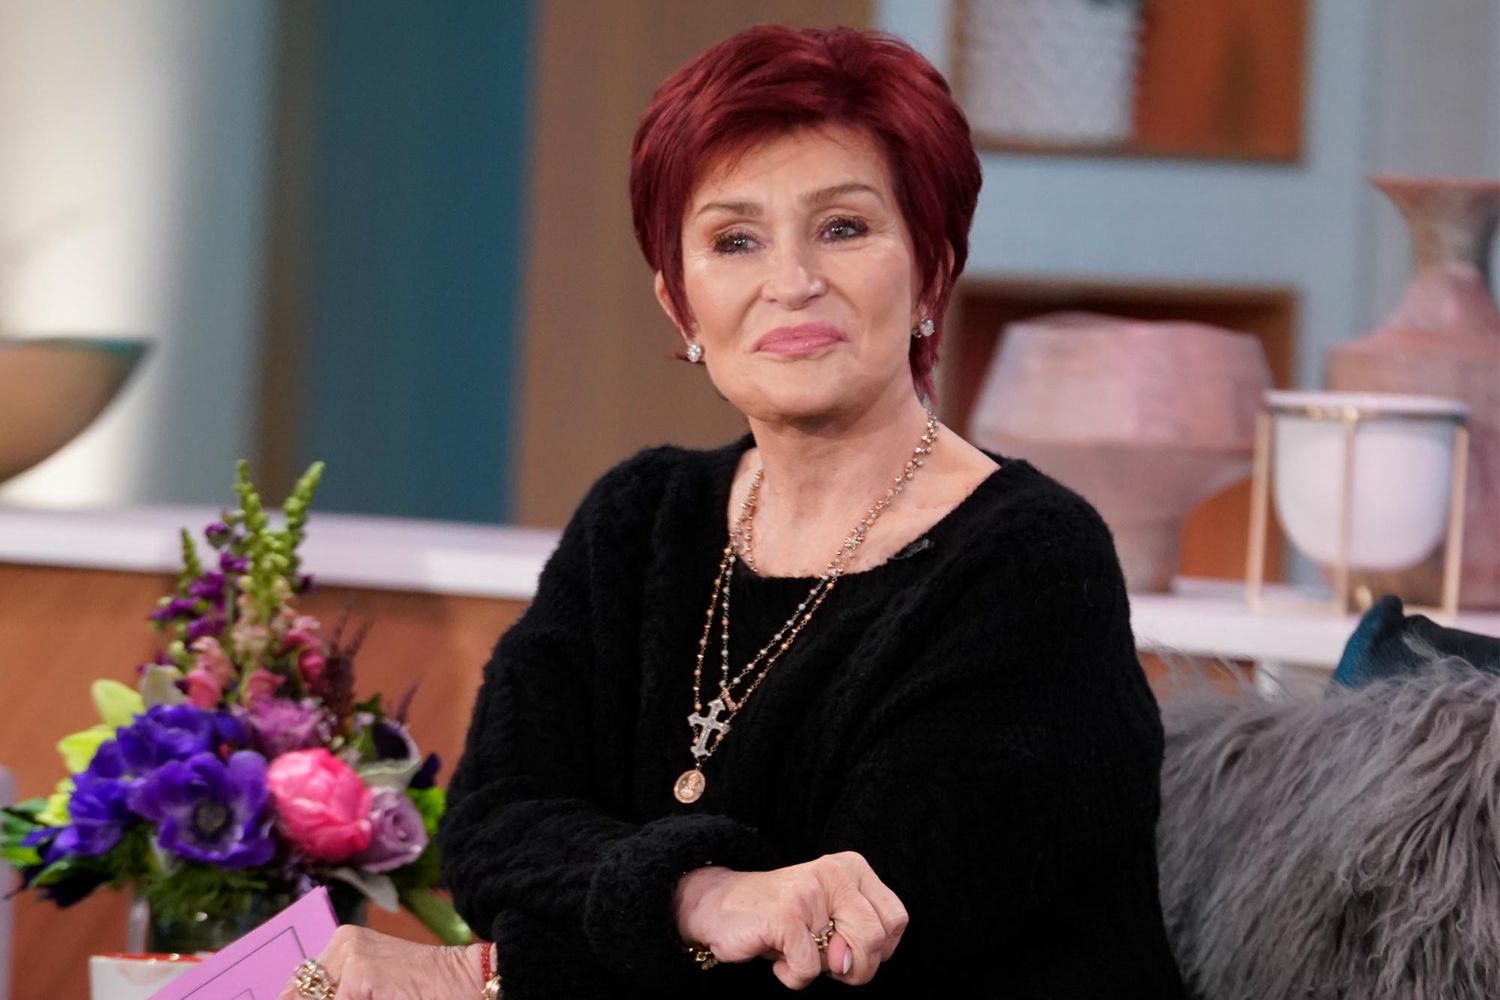 Sharon Osbourne says she was a 'lamb slaughtered' at 'The Talk' in new cancel culture series